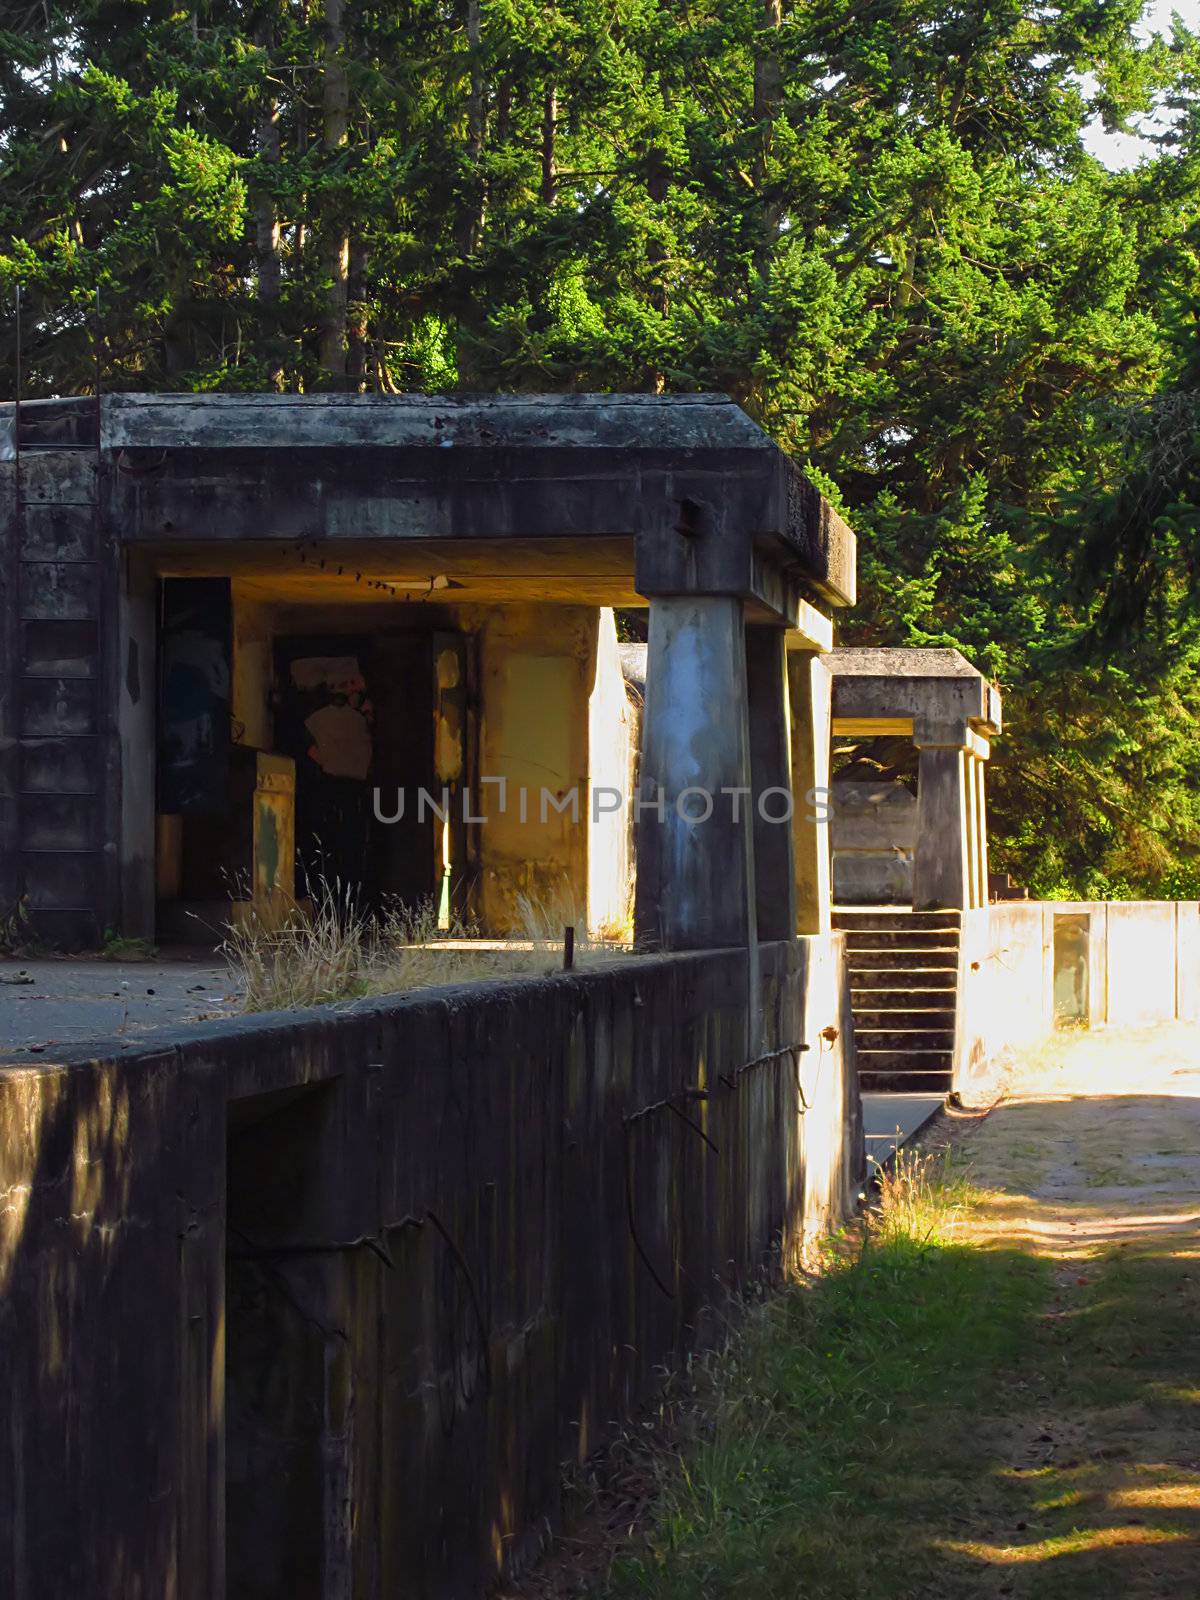 A photograph of an old abandoned military fort.